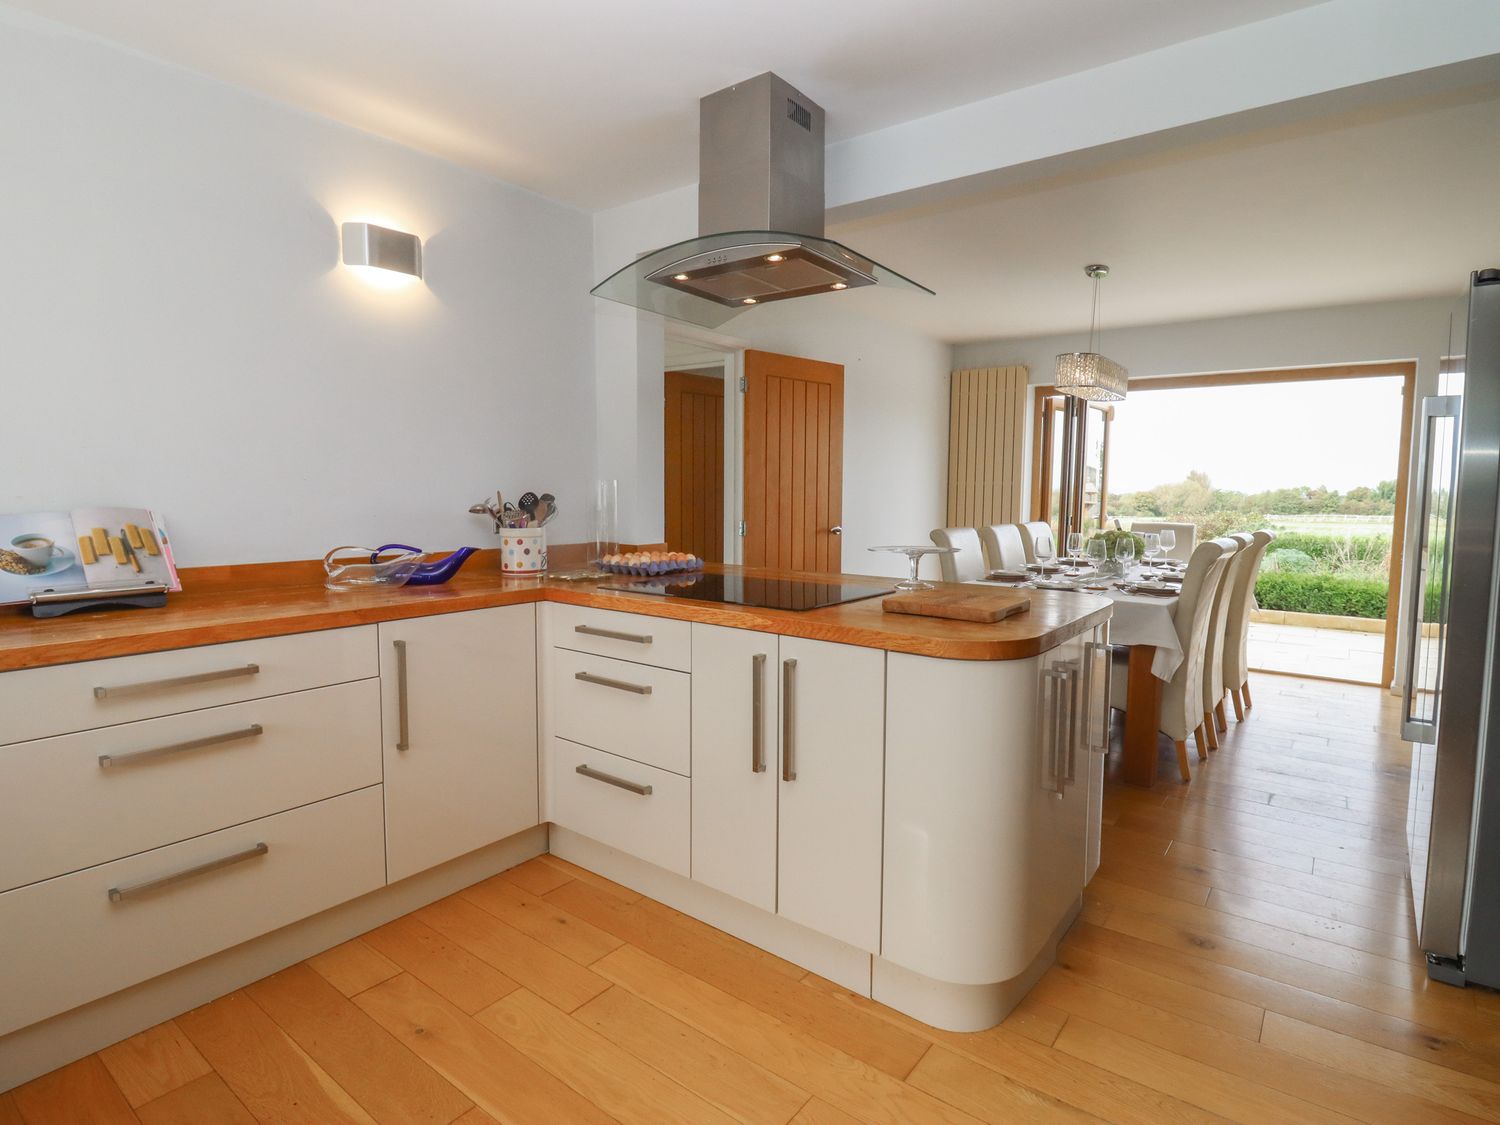 The Firs, in Brockworth, Gloucestershire. Four-bedroom home with rural views. Hot tub. Pet-friendly.